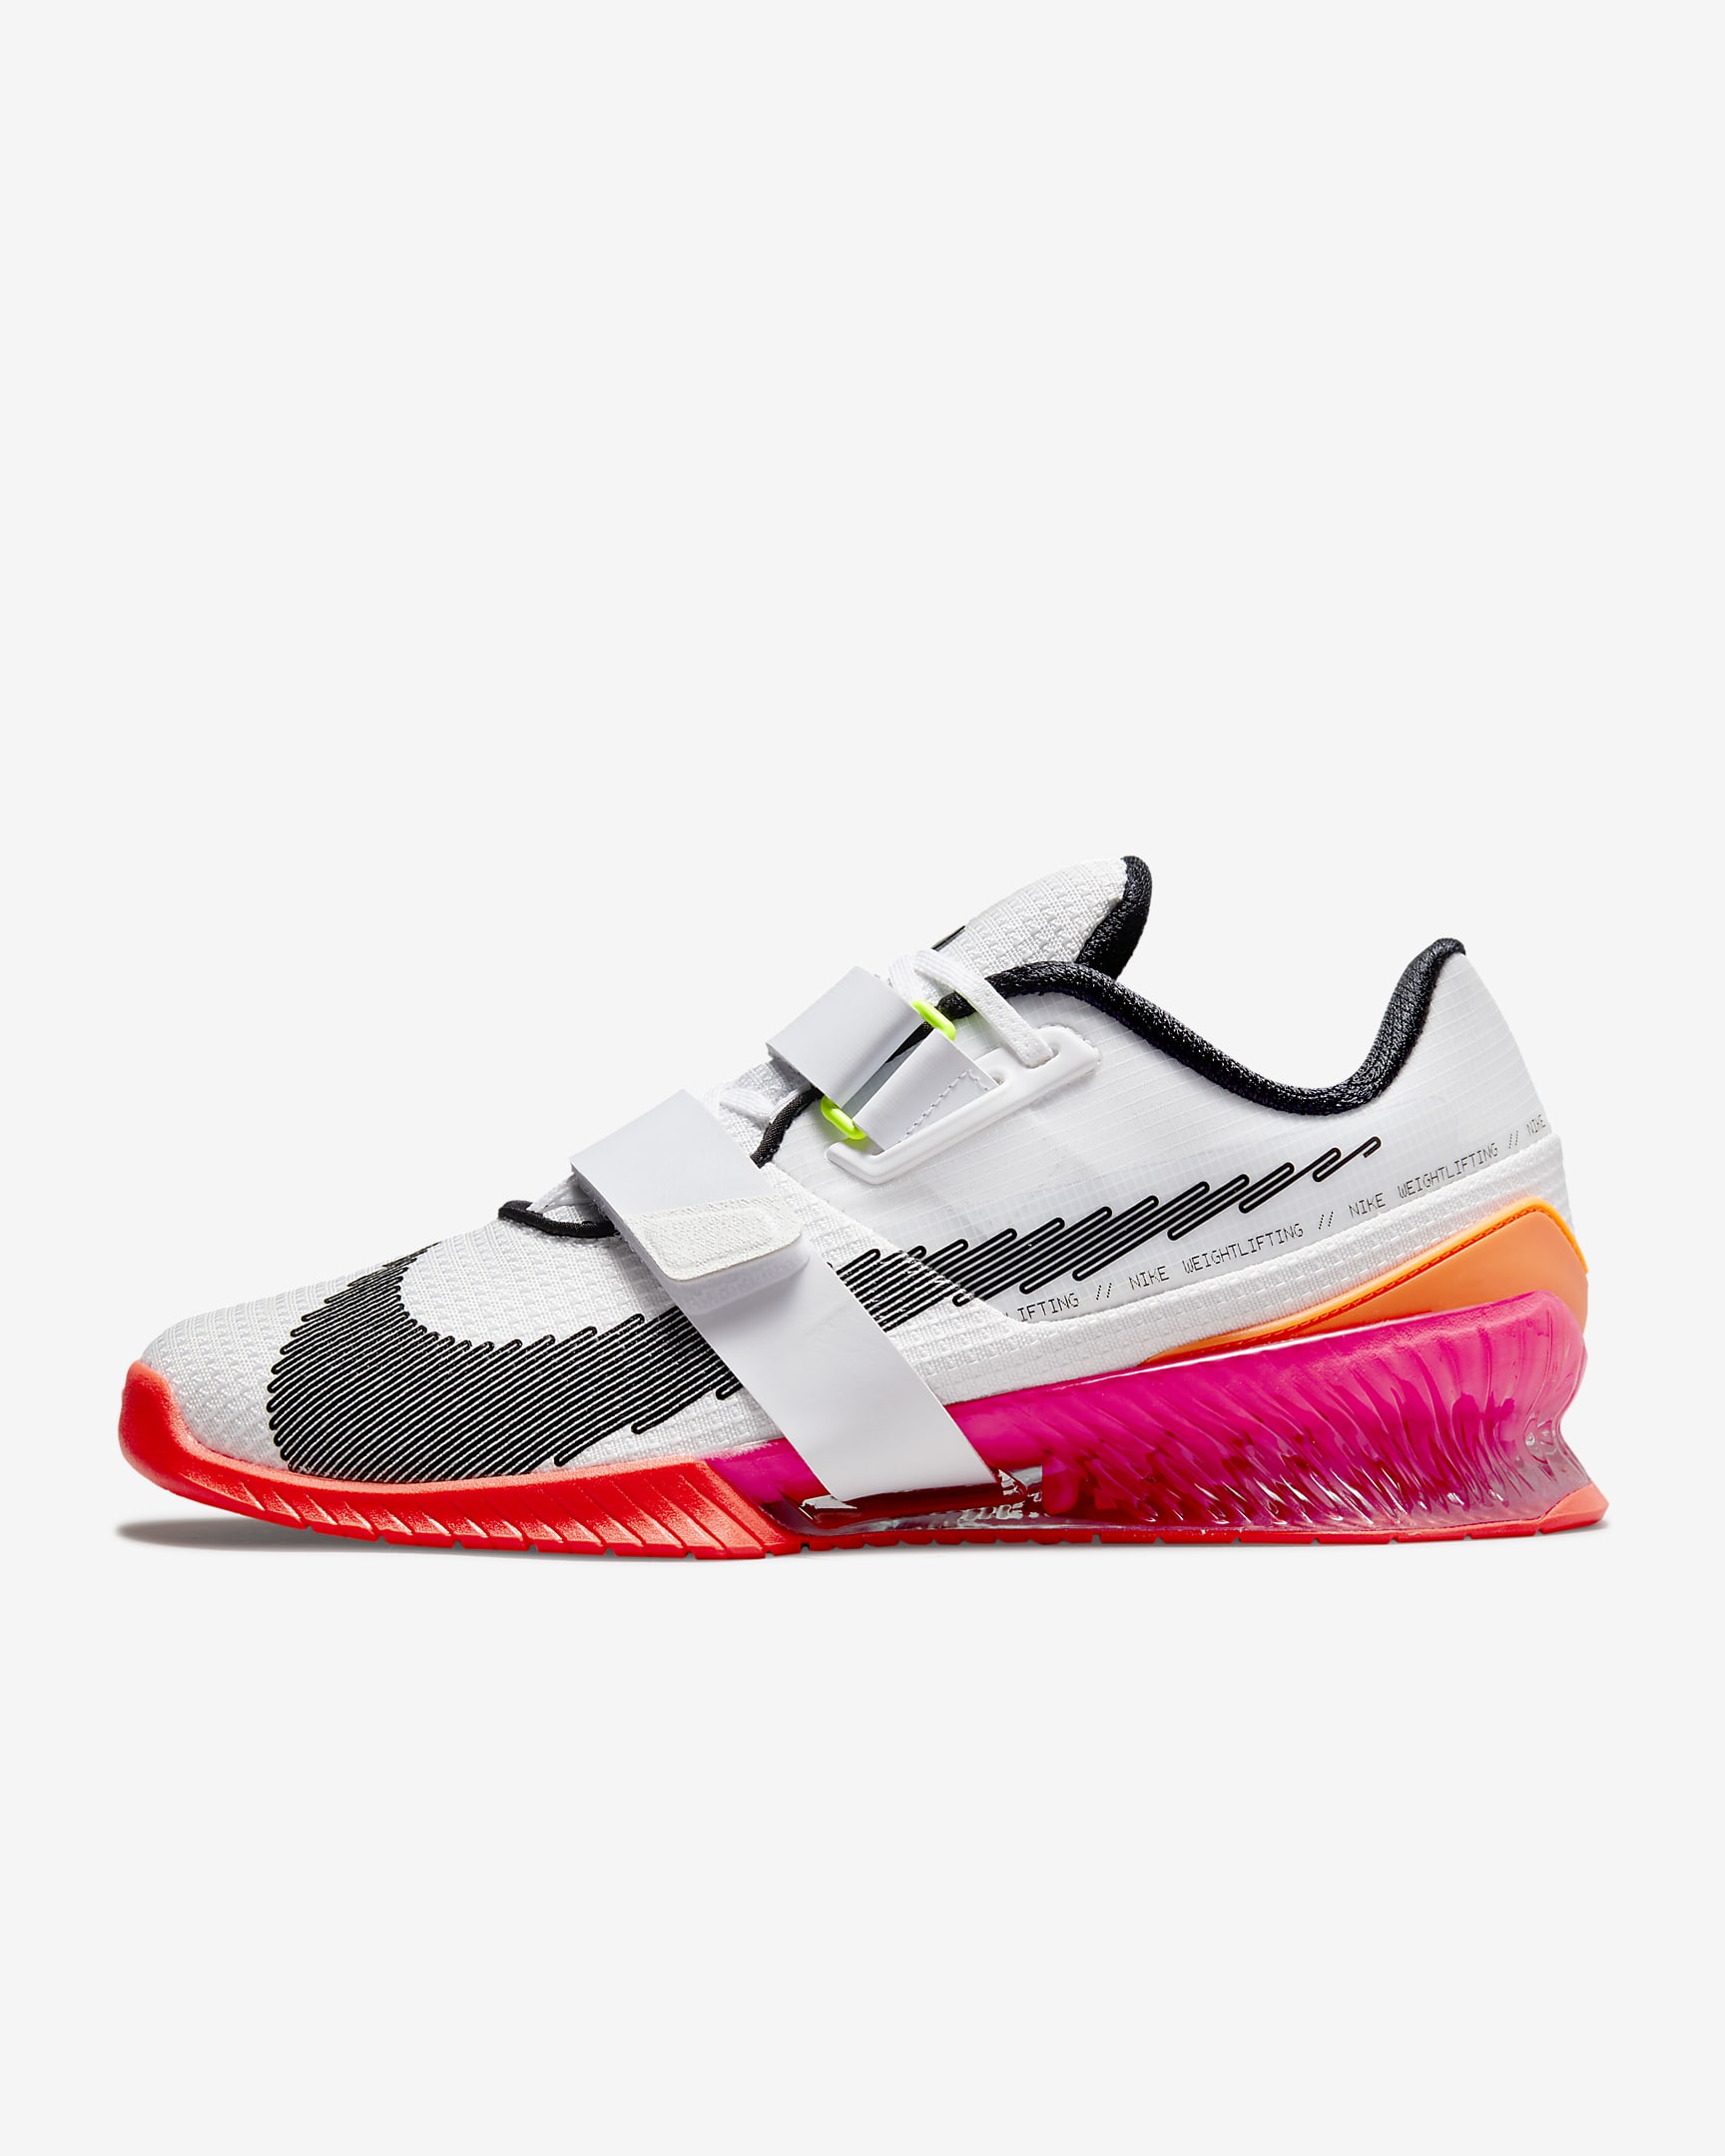 romaleos-4-se-weightlifting-shoe-fH7fsw.png